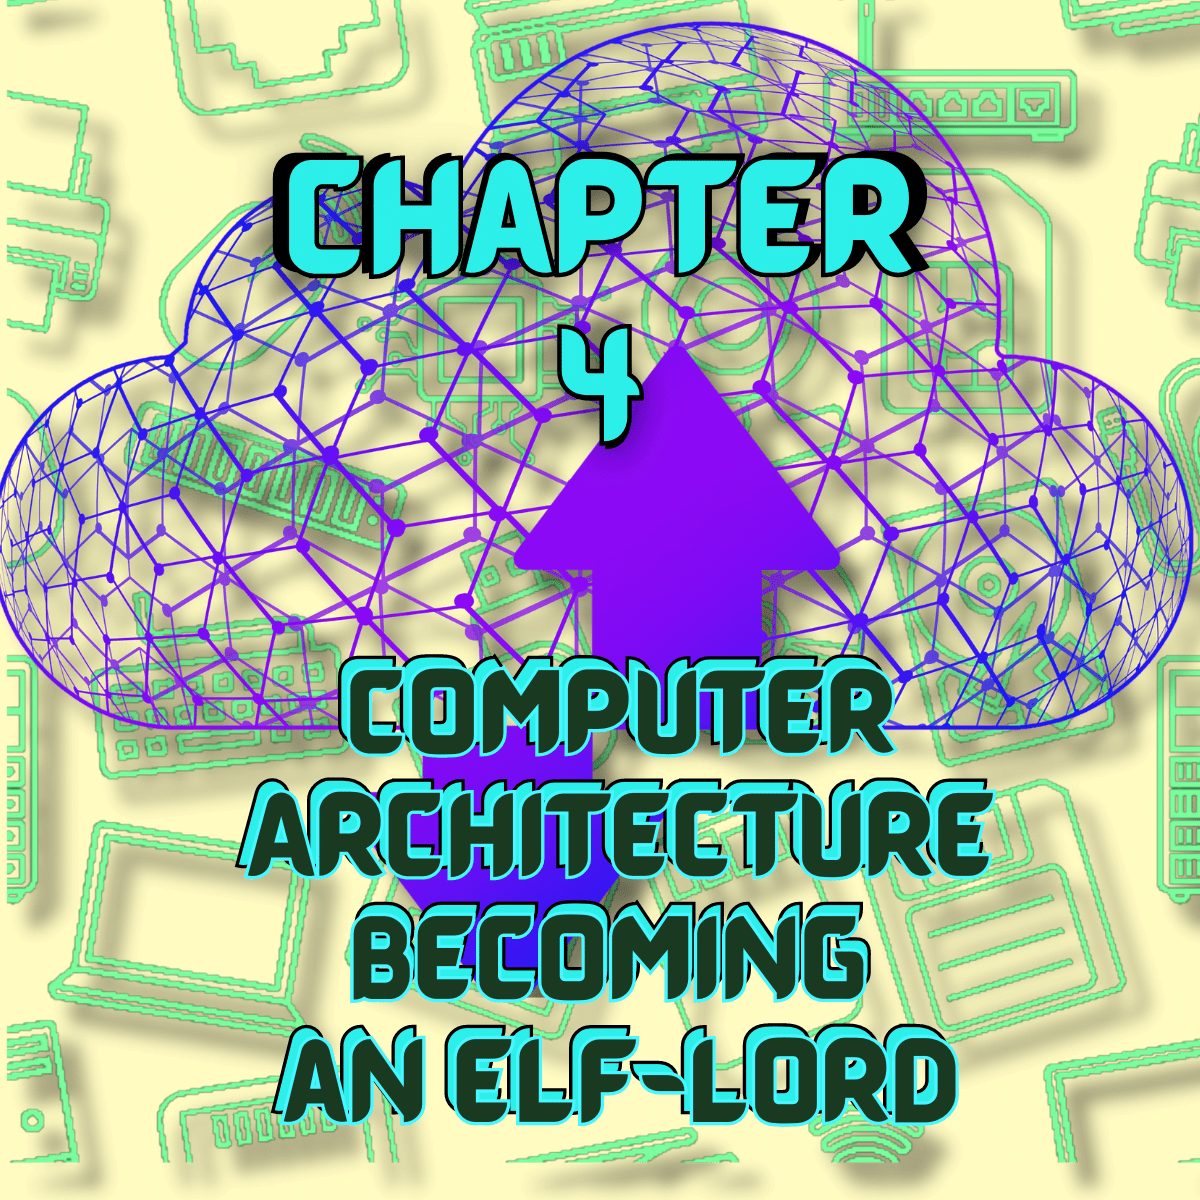 Learn-Computer-Architecture-Becoming-an-Elf-Lord-Chapter-4